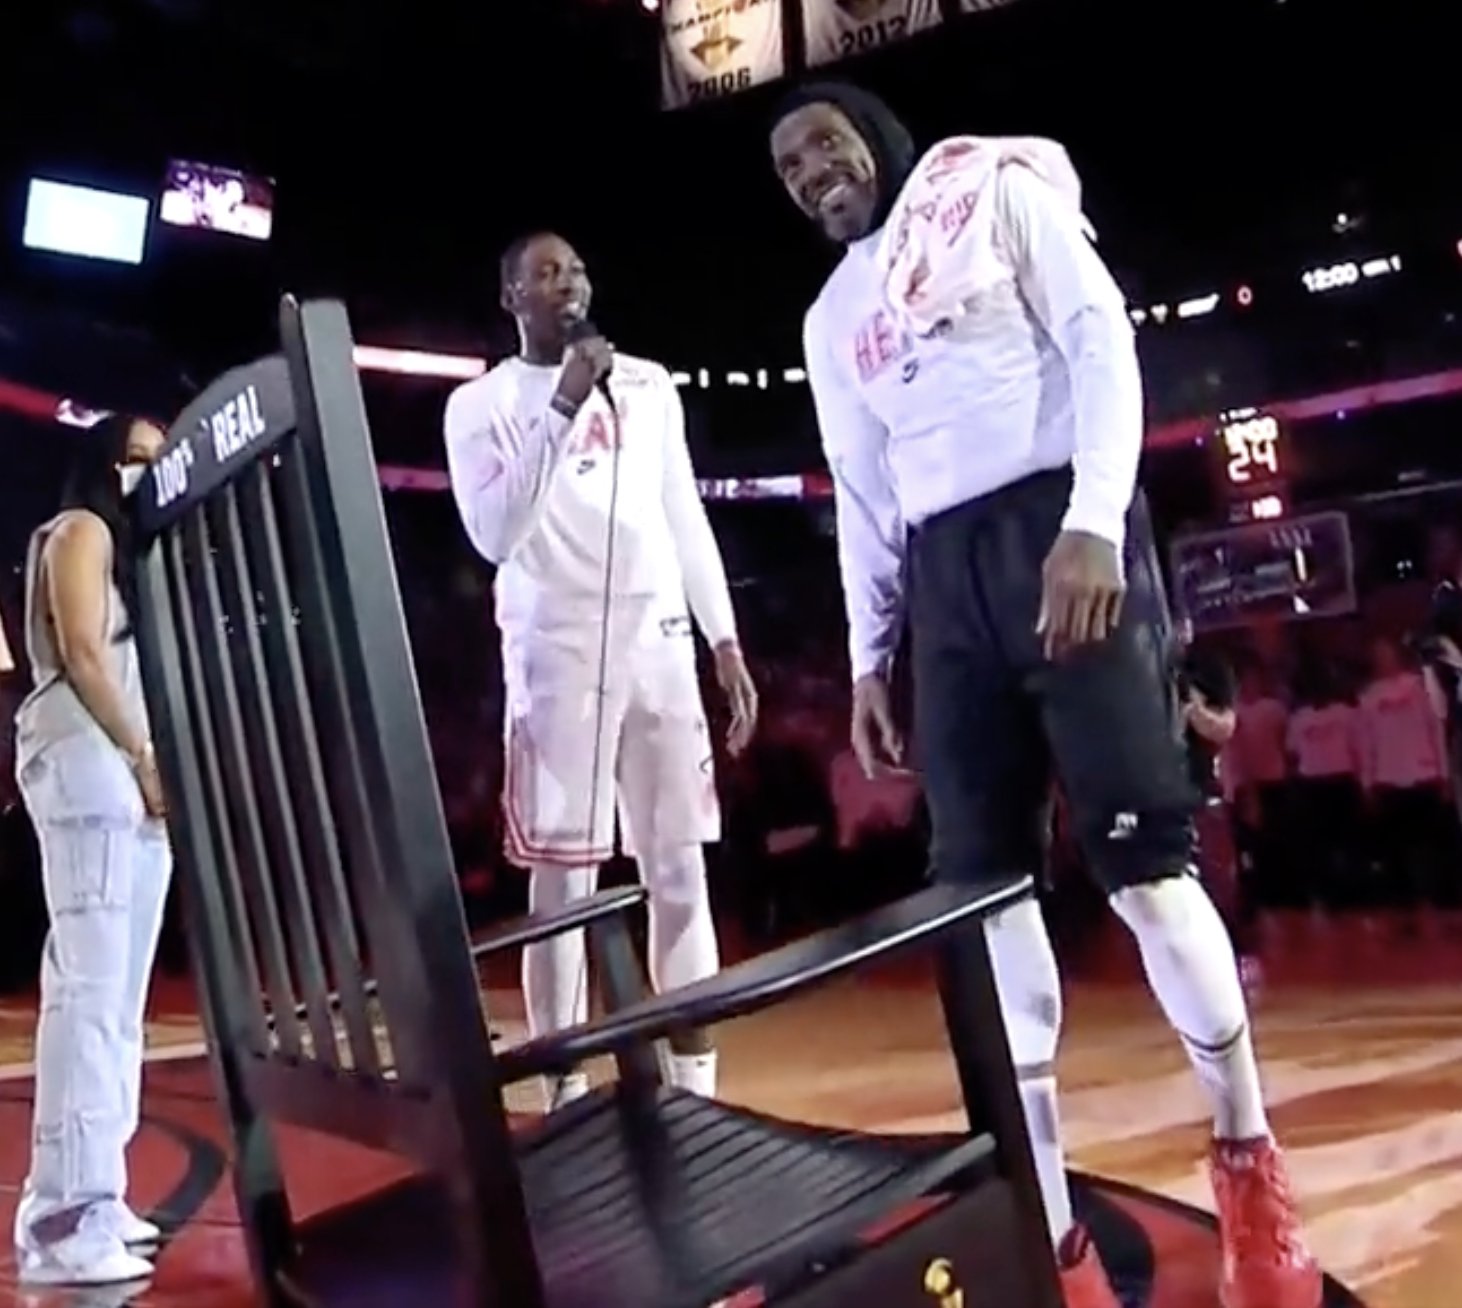 Bam really gave Udonis Haslem a retirement rocking chair